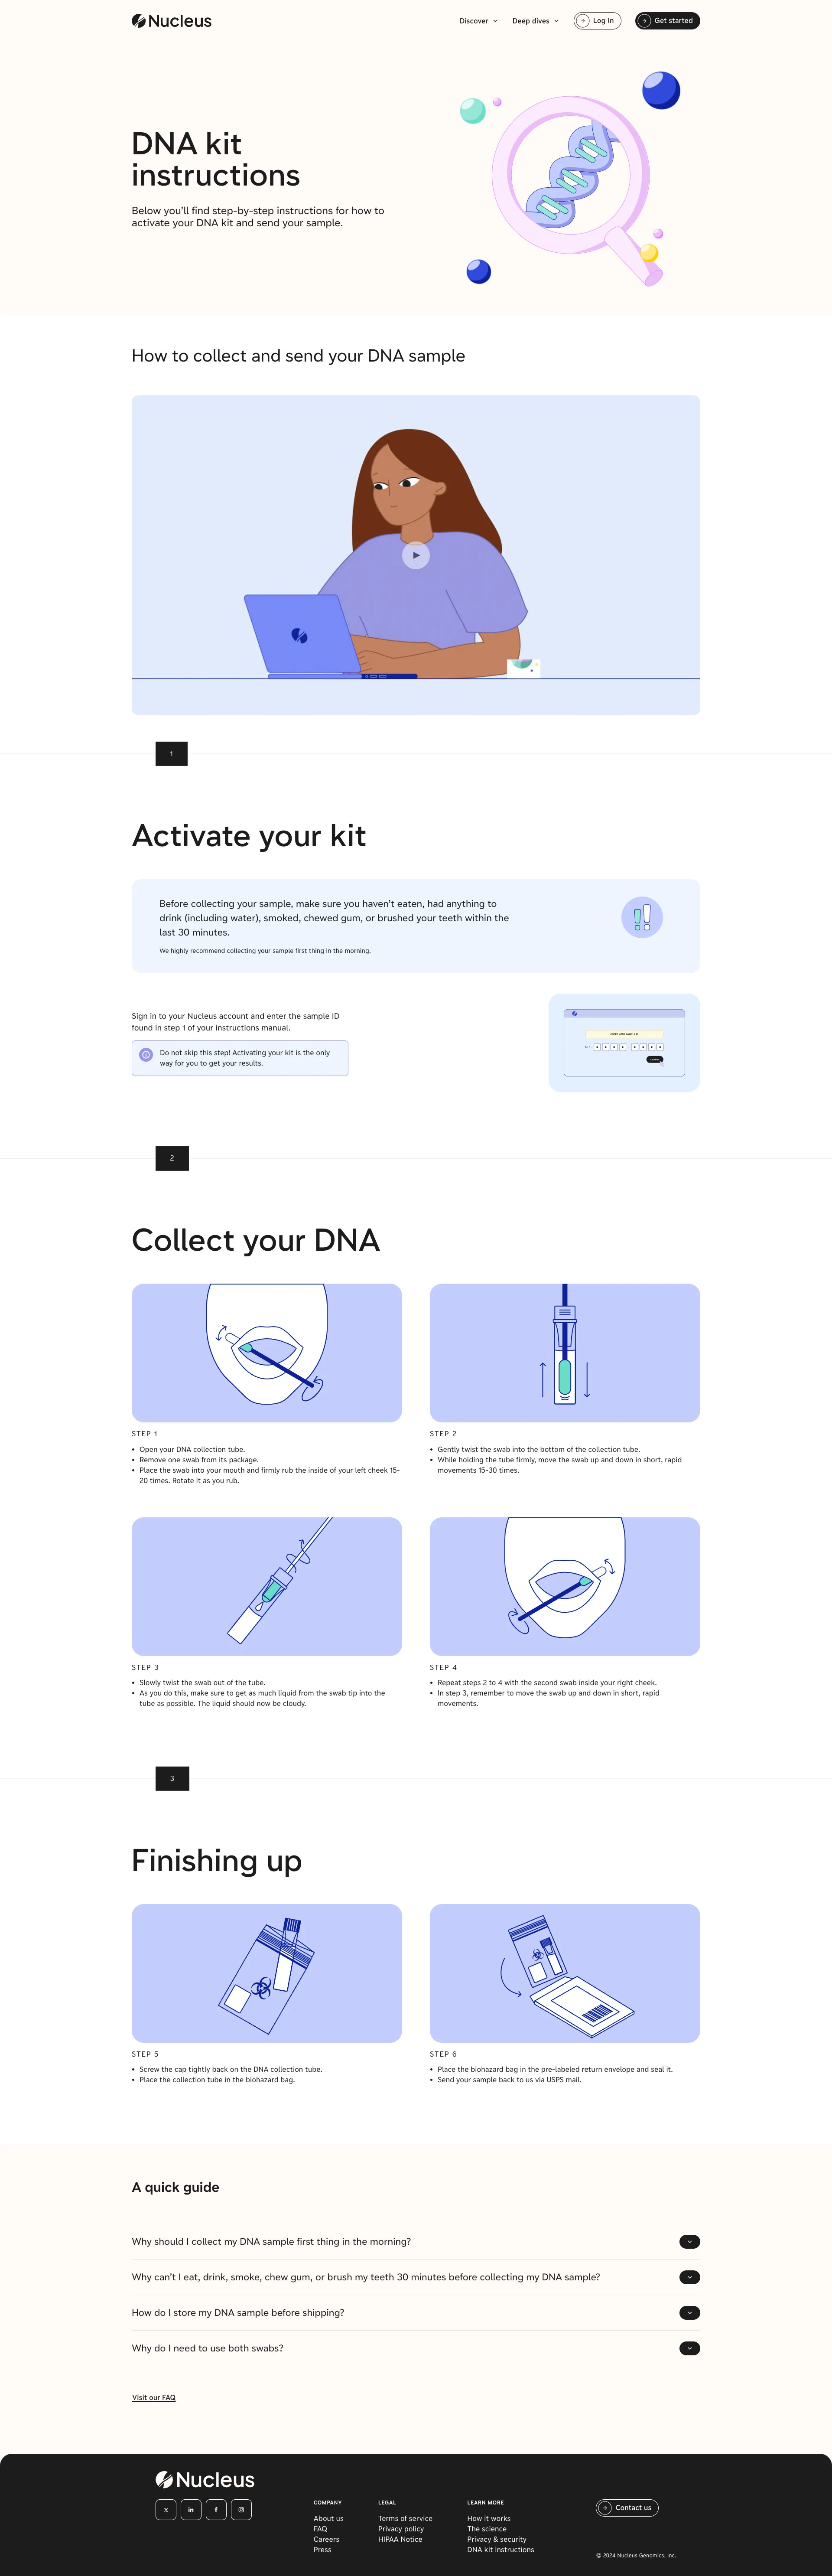 Nucleus Genomics Landing Page Example: Rediscover yourself. Nucleus is a new era of proactive health, delivering insights guided by your unique DNA and lifestyle that inspire your healthiest life.